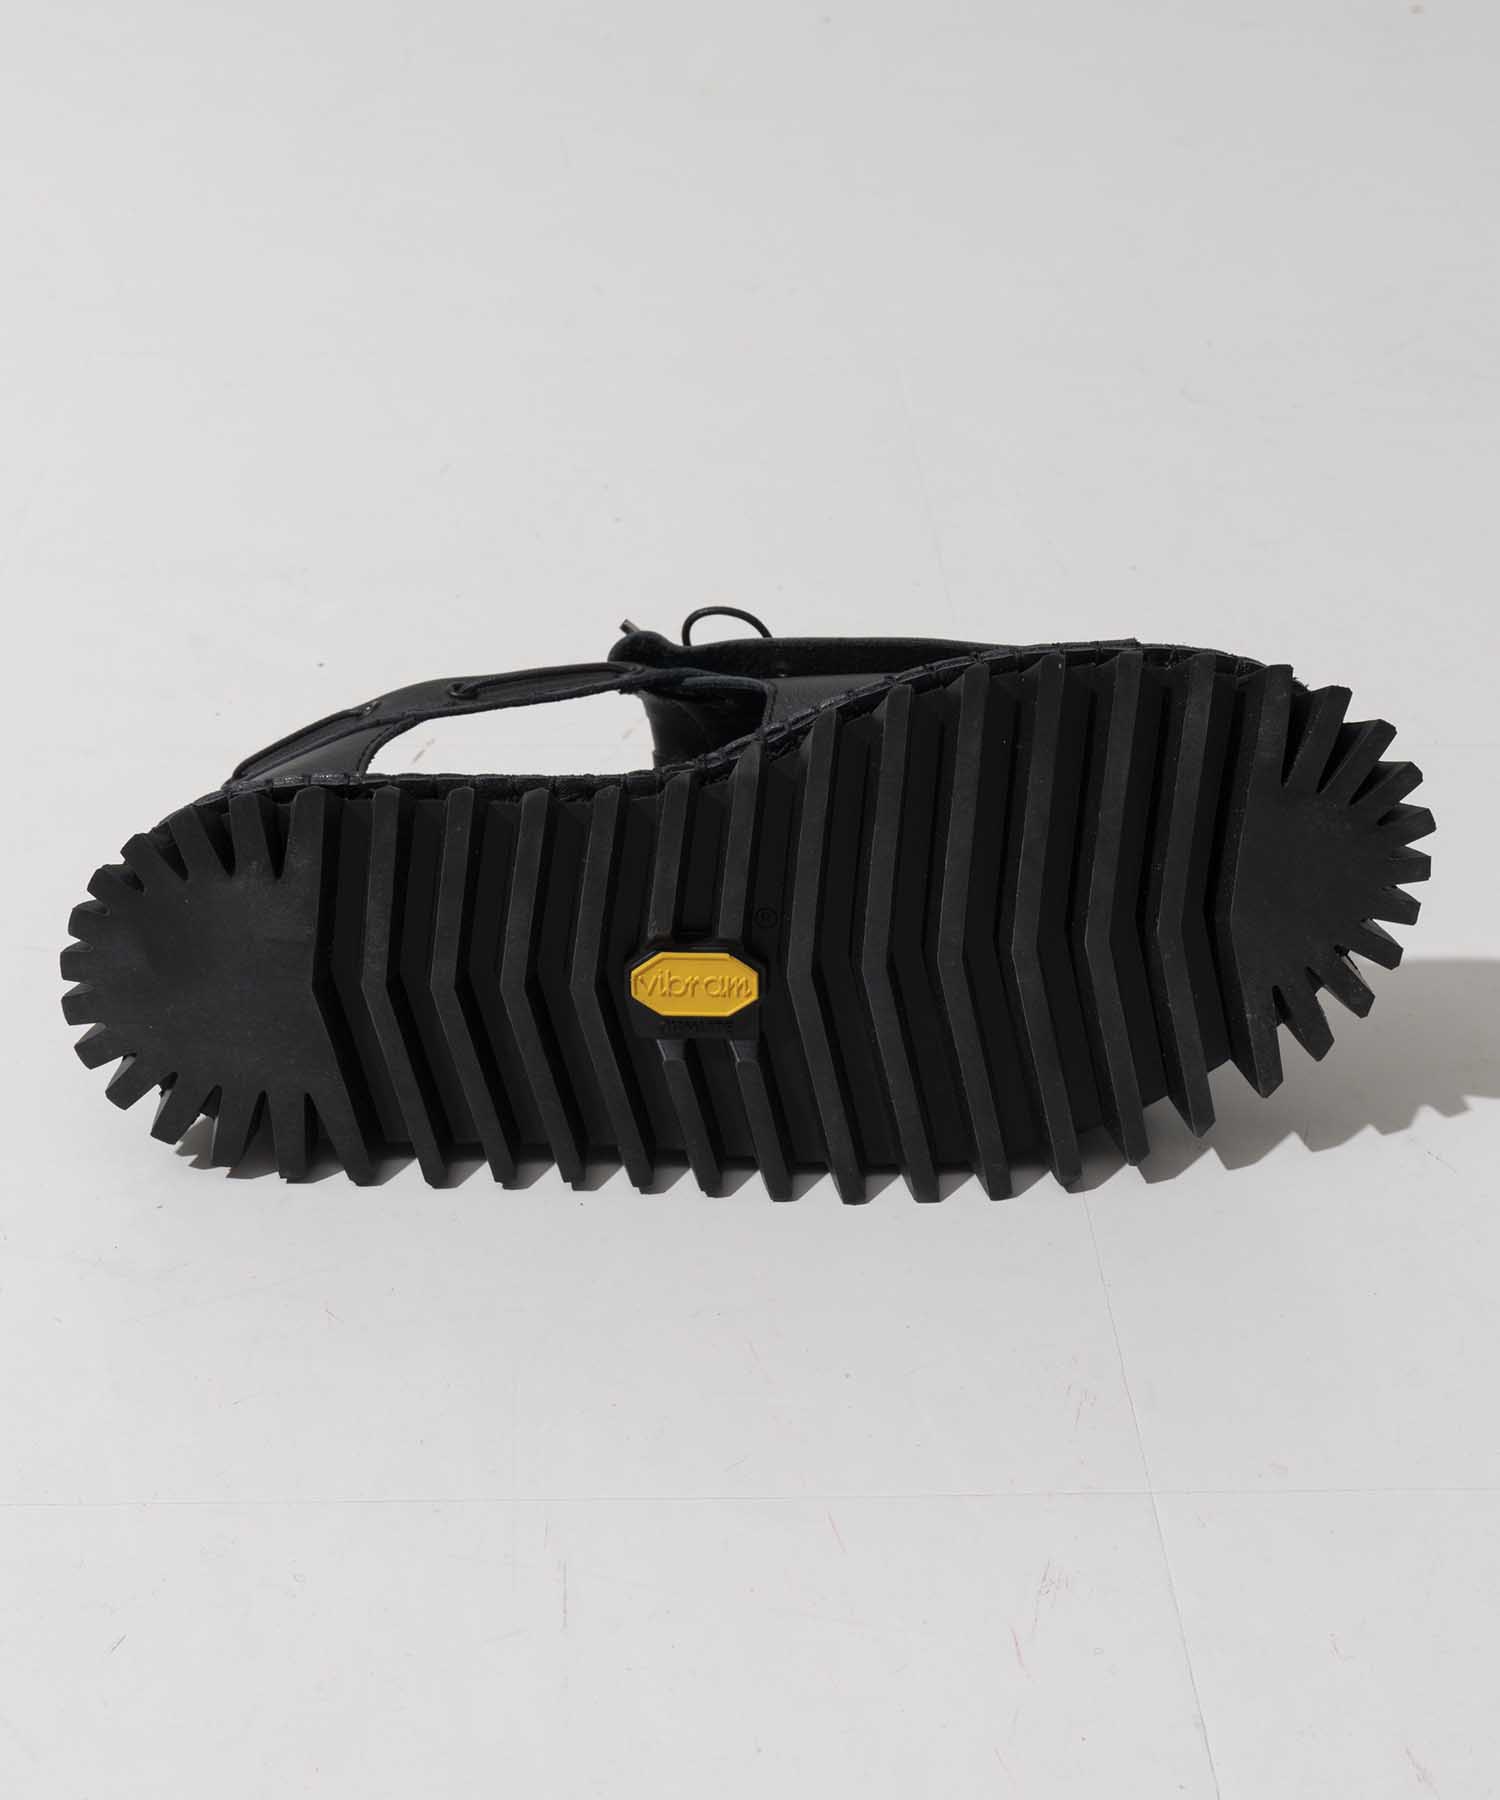 [SALE] [Special Shoes Factory Collaboration] Italian Vibram Sole Tassel Made in Tokyo